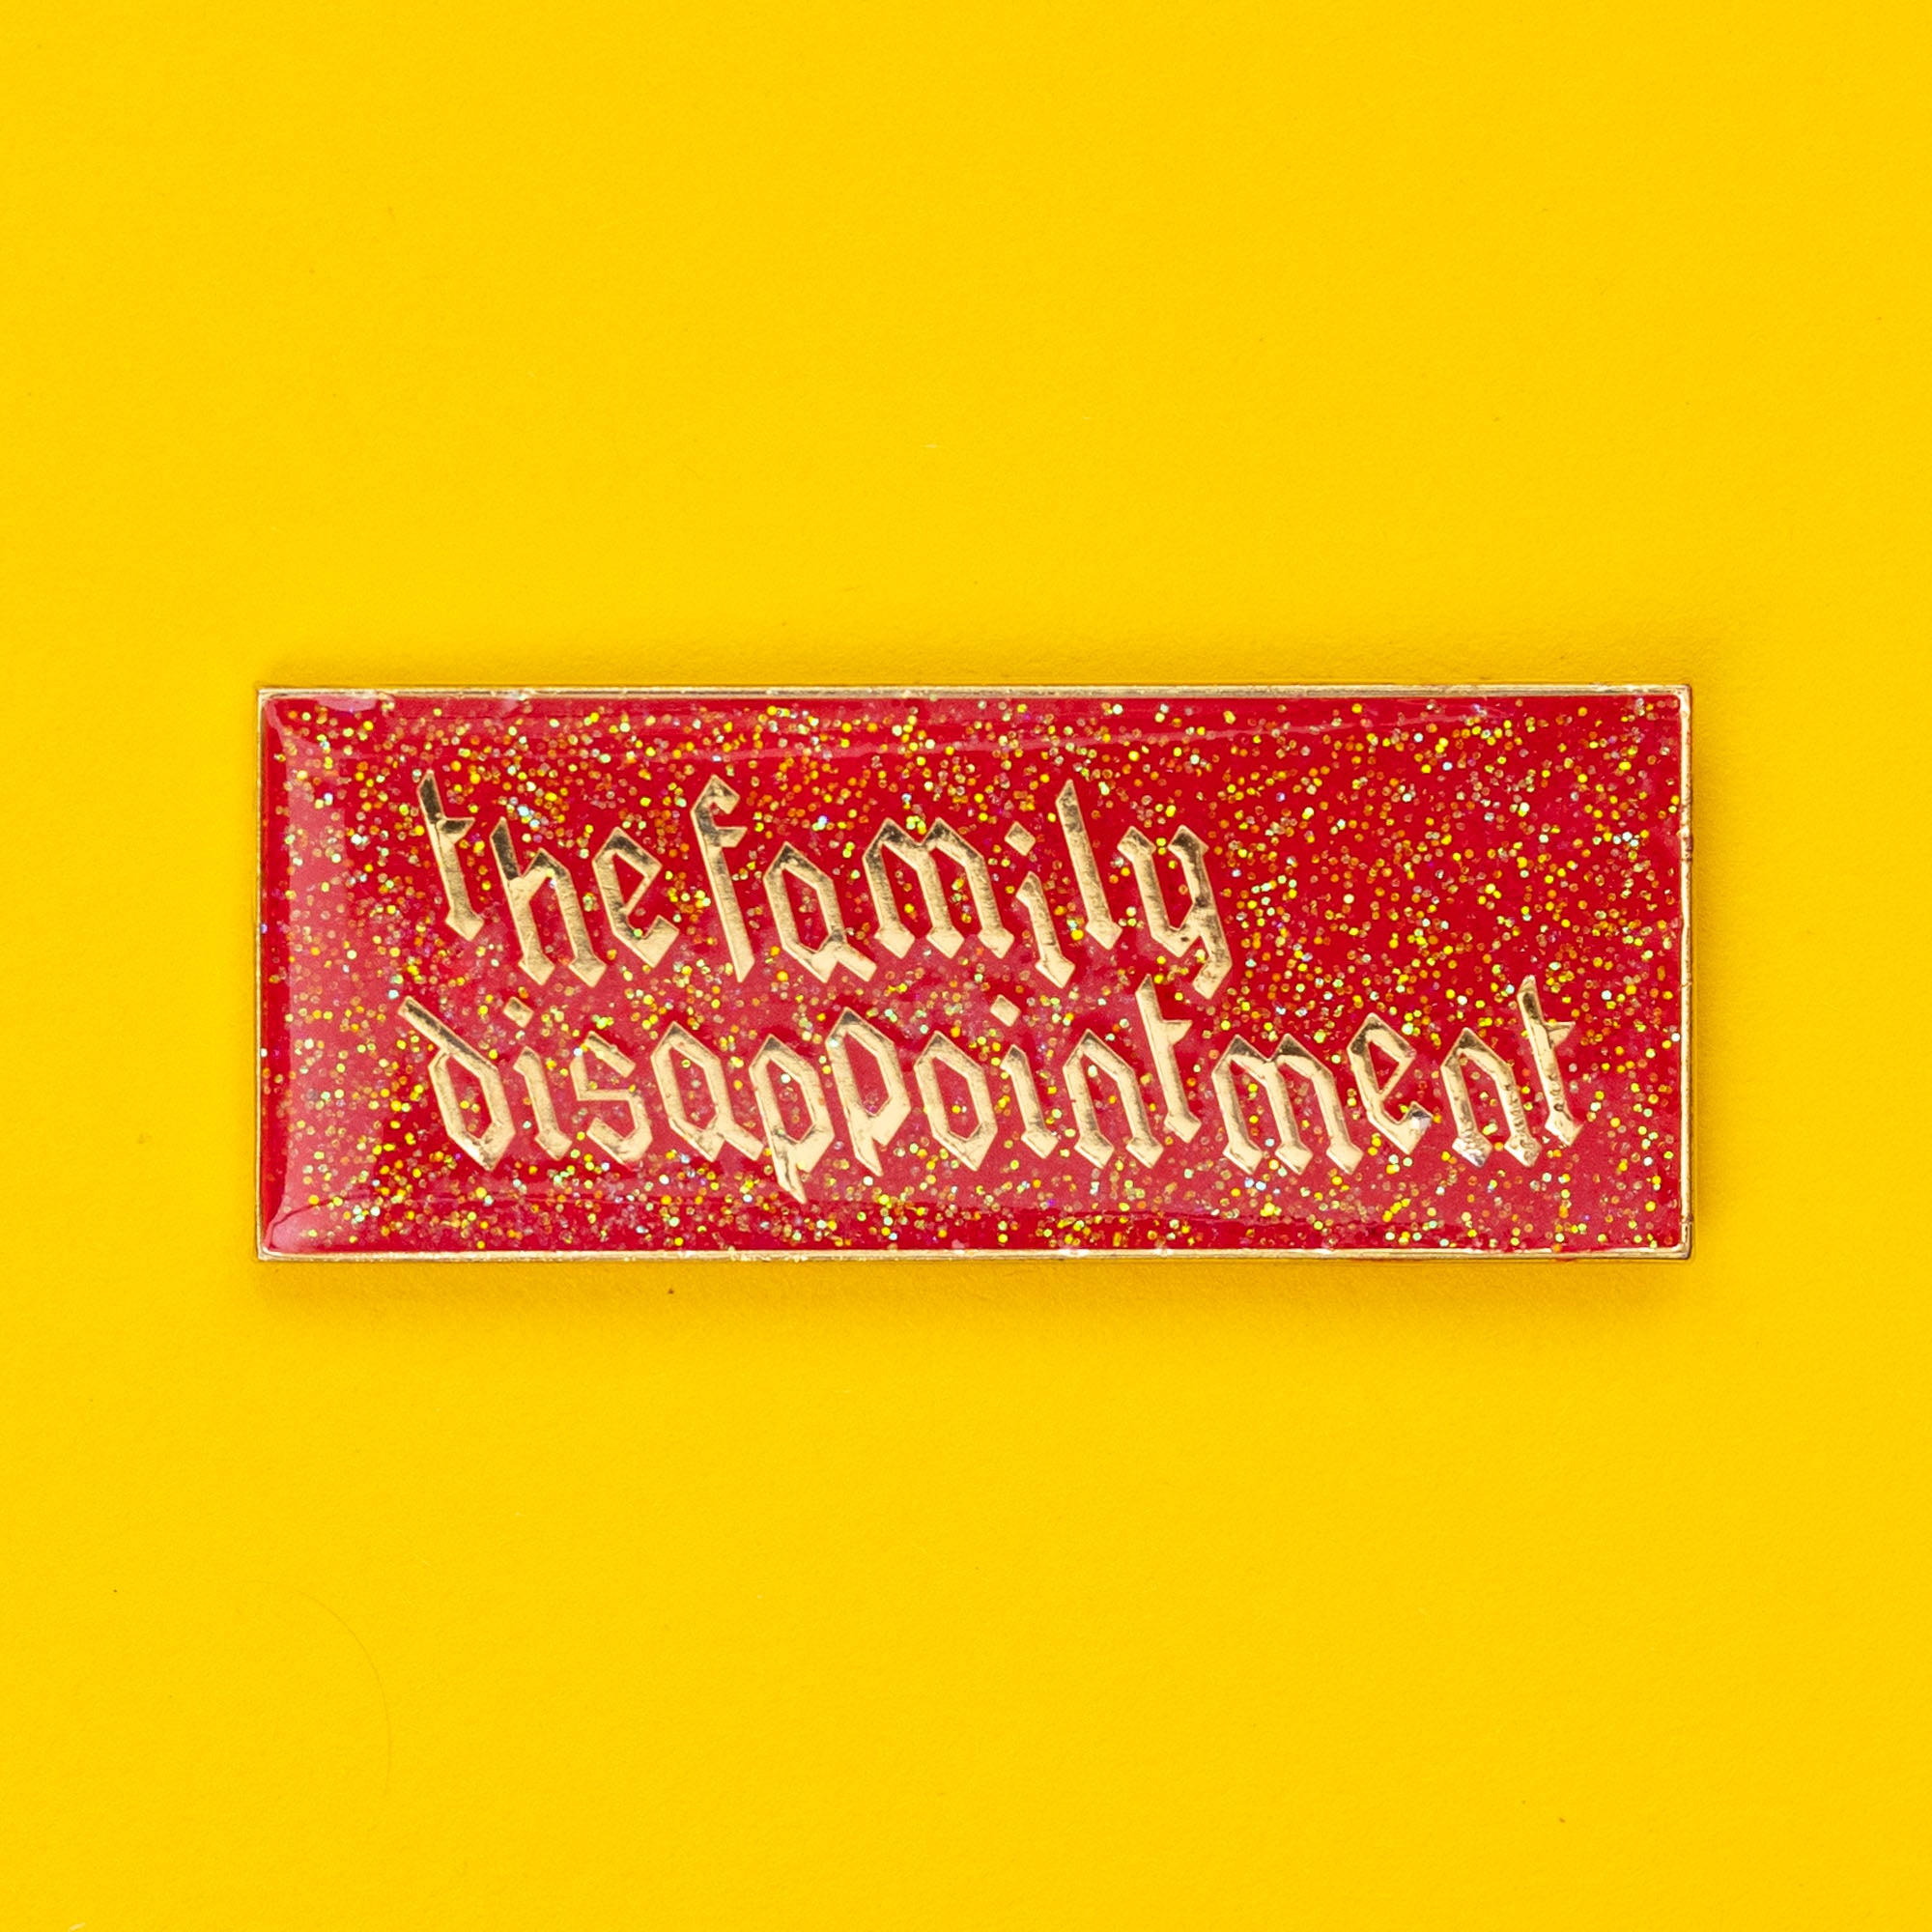 The Family Disappointment Enamel Pin